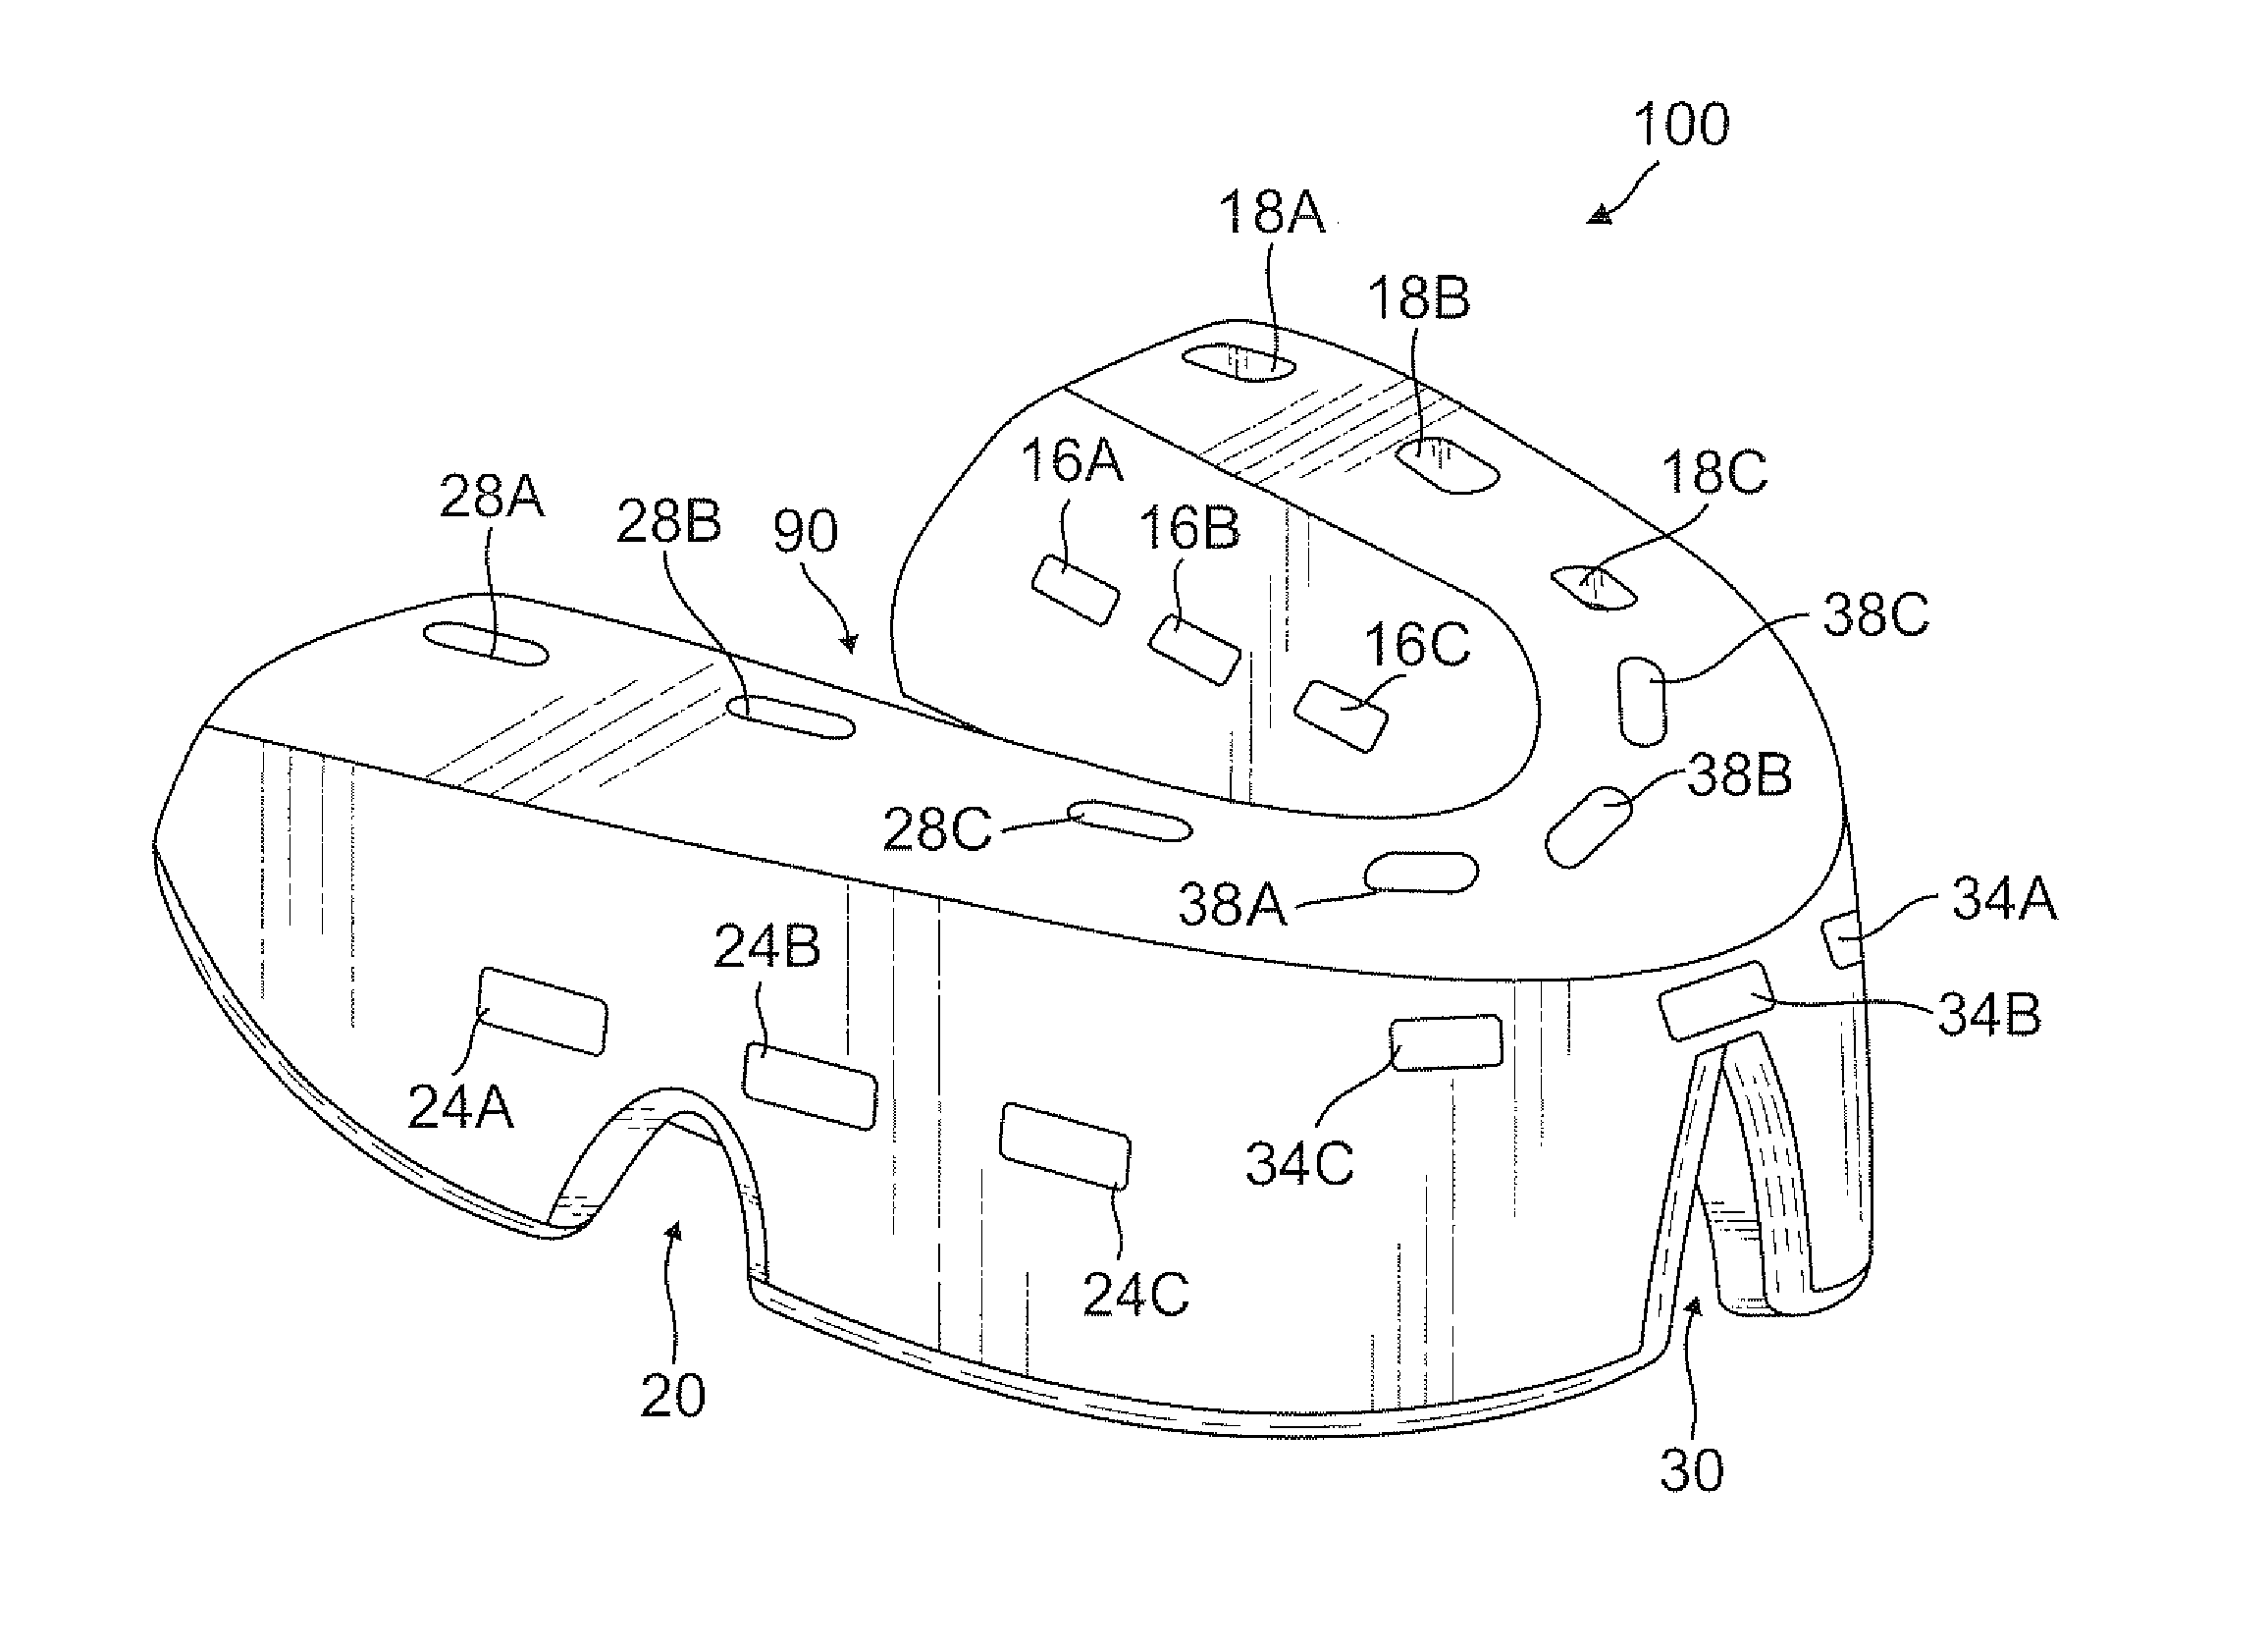 Mouthguard having breathing cavities and breathing holes incorporated into the body of the mouthguard